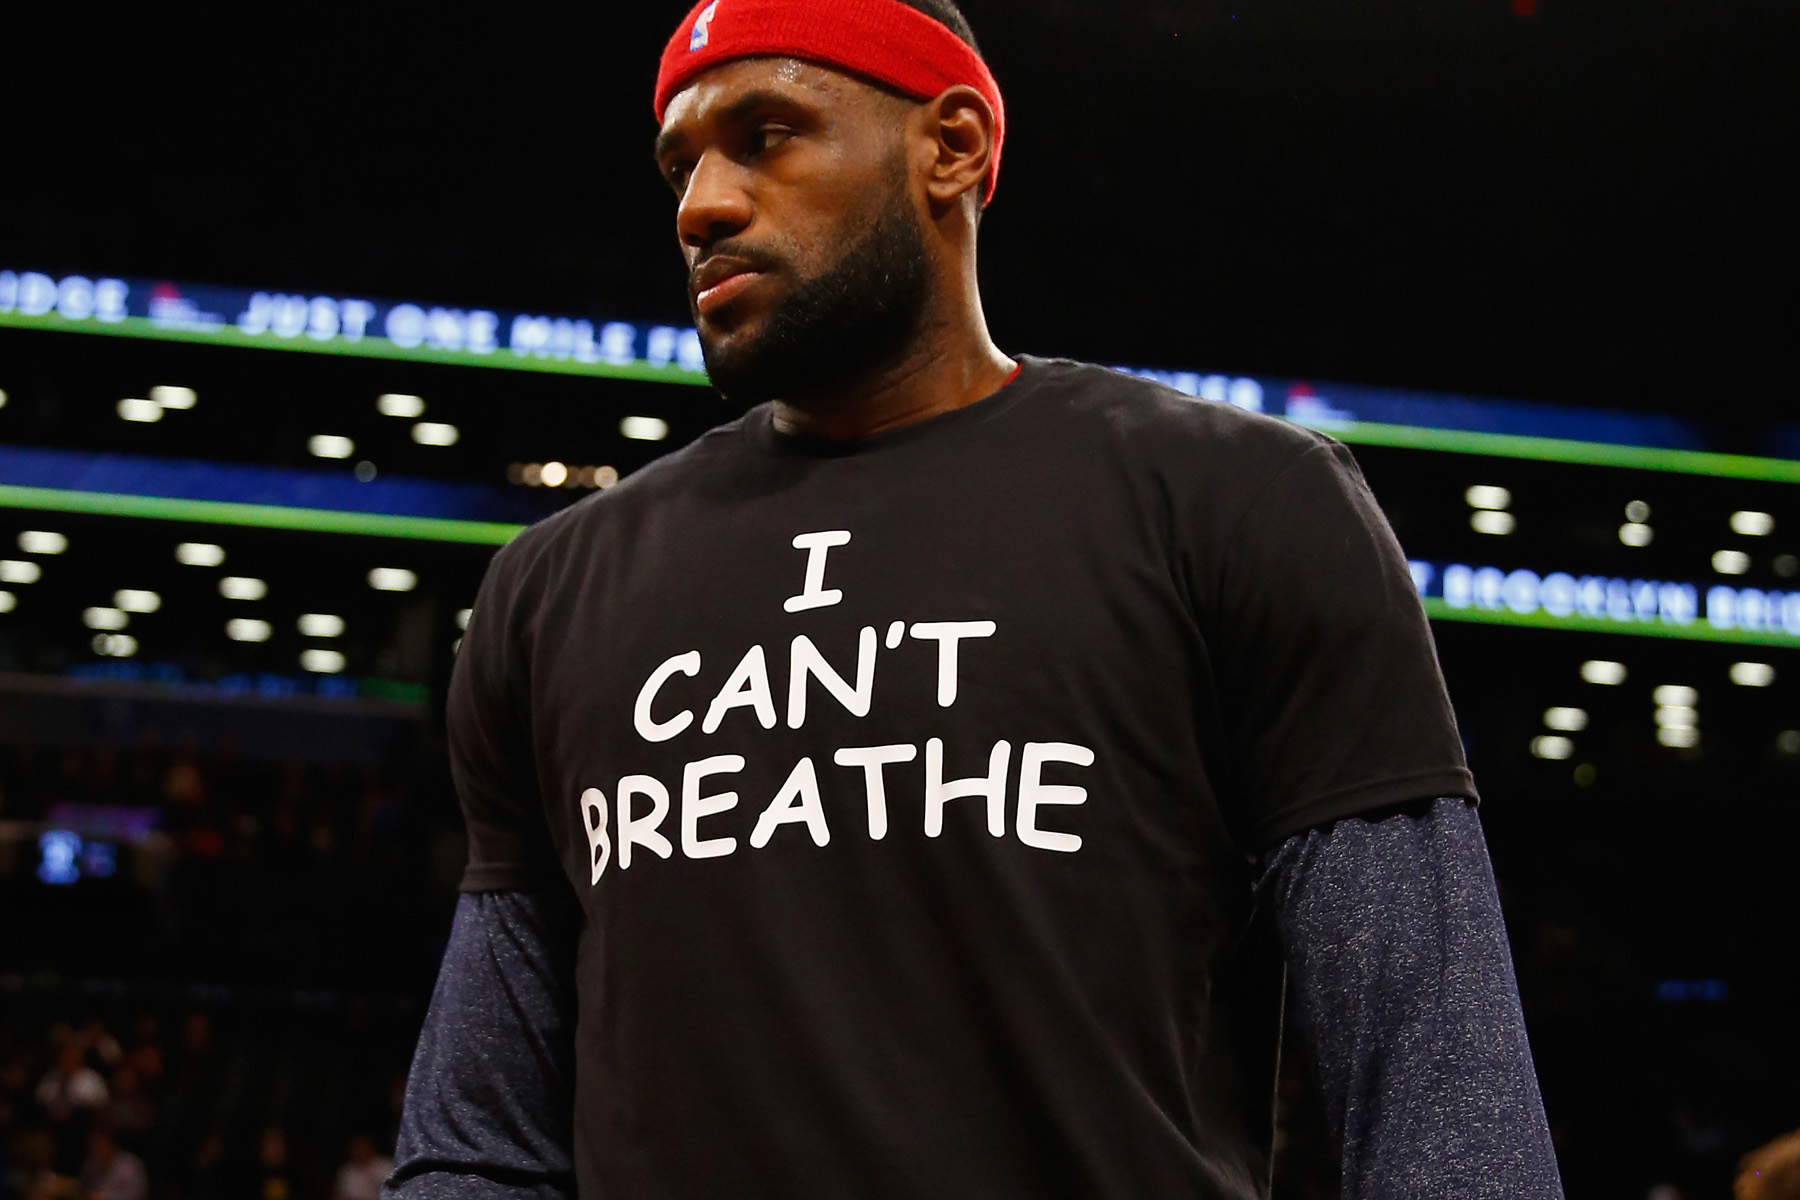 LeBron James, Kyrie Irving, other players wear 'I Can't Breathe' shirts  before Nets-Cavaliers game 